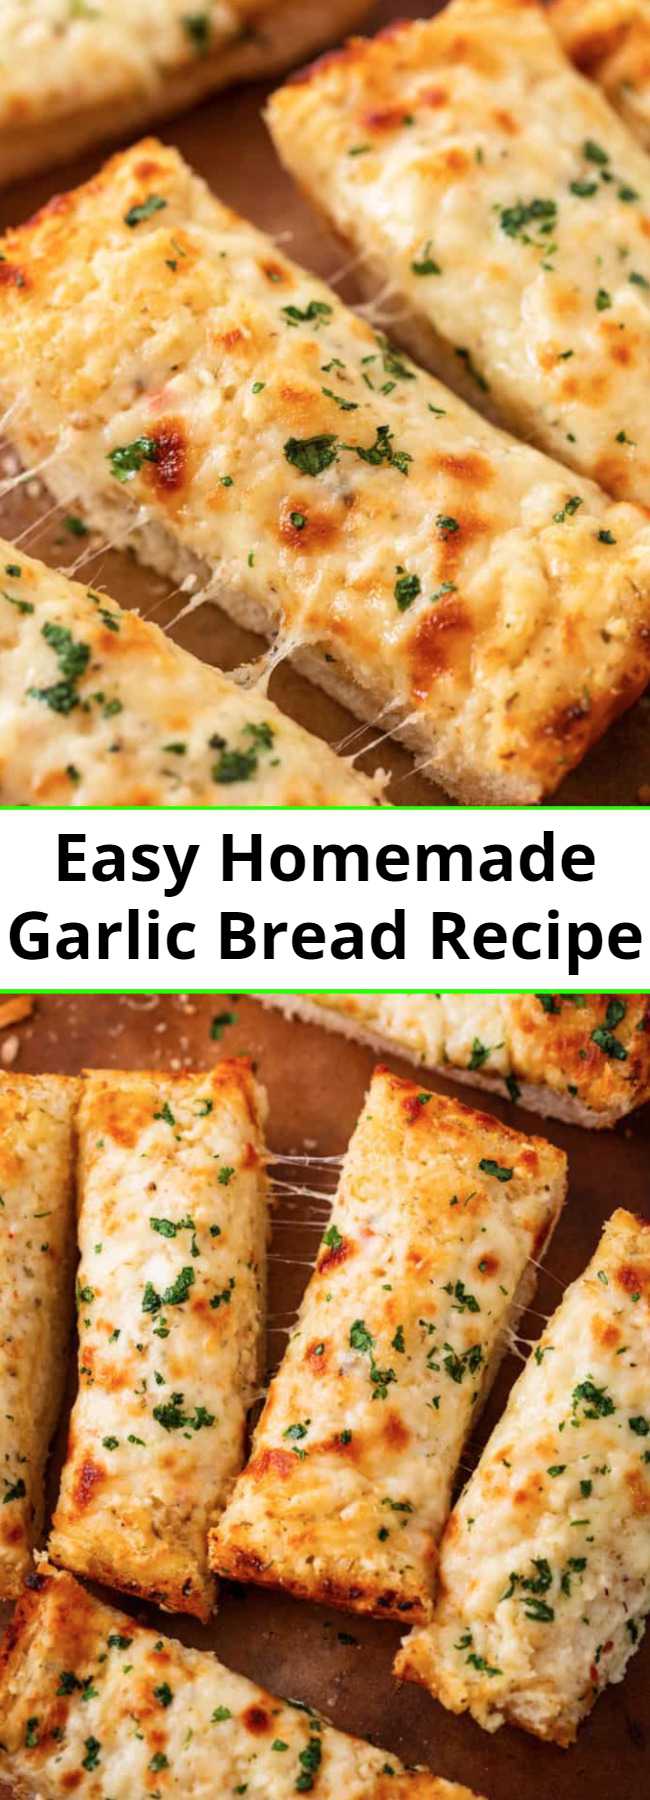 Easy Homemade Garlic Bread Recipe - This easy homemade garlic bread is loaded with two kinds of cheese and has secret ingredients that put it above the other garlic bread recipes out there! #recipe #sidedishidea #italianfood #sidedish #comfortfood #sides #breadsticks